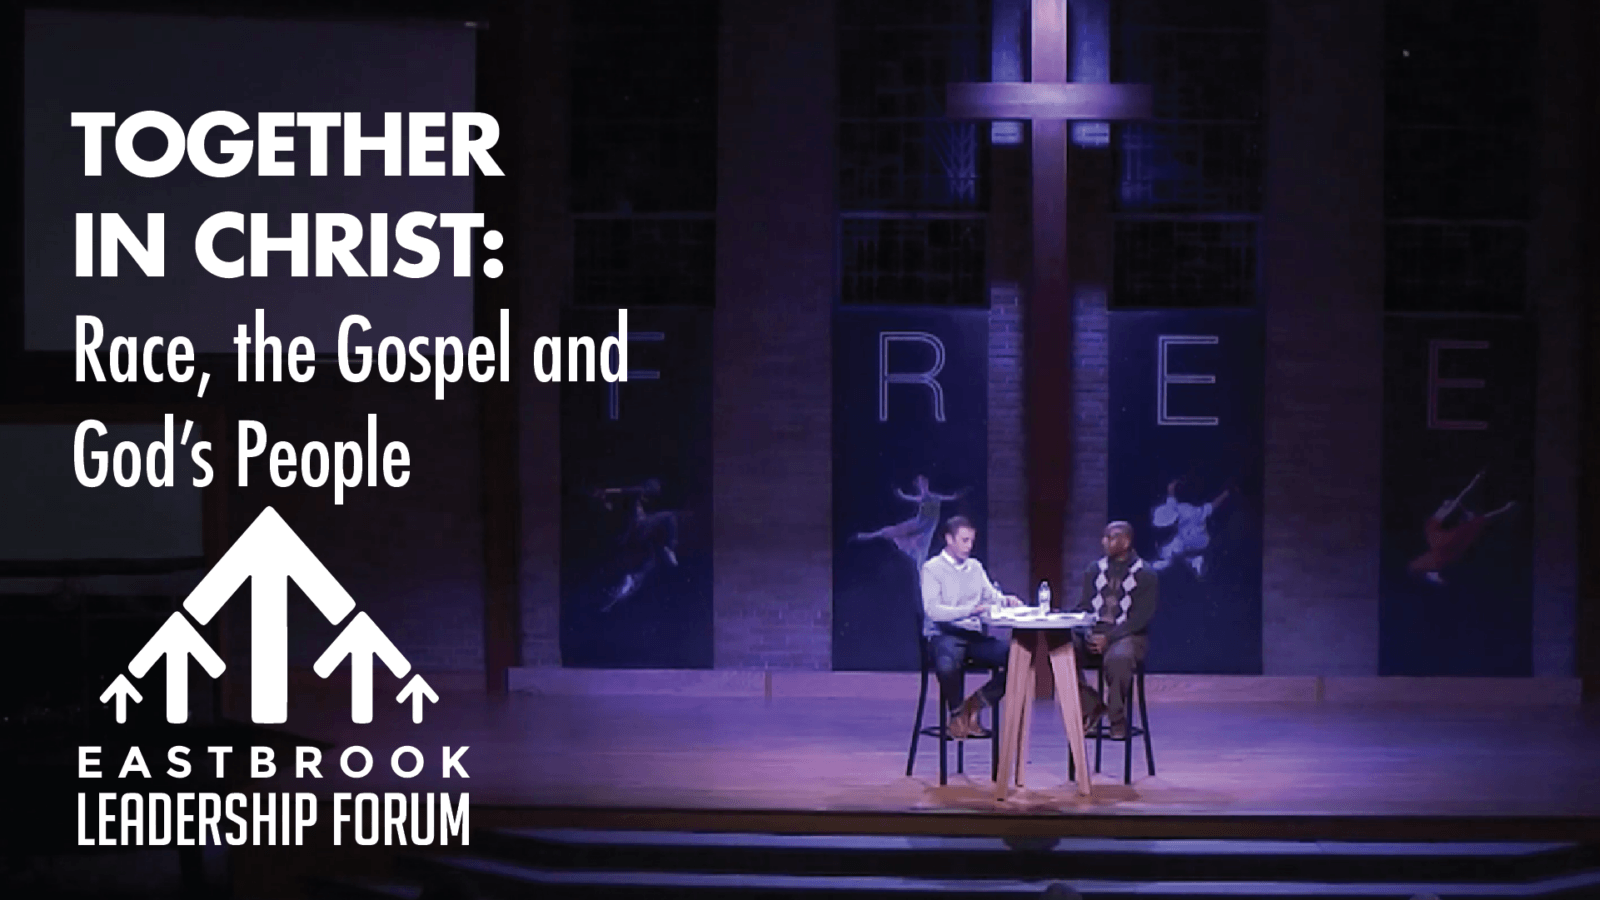 Together in Christ: Race, the Gospel and God's People